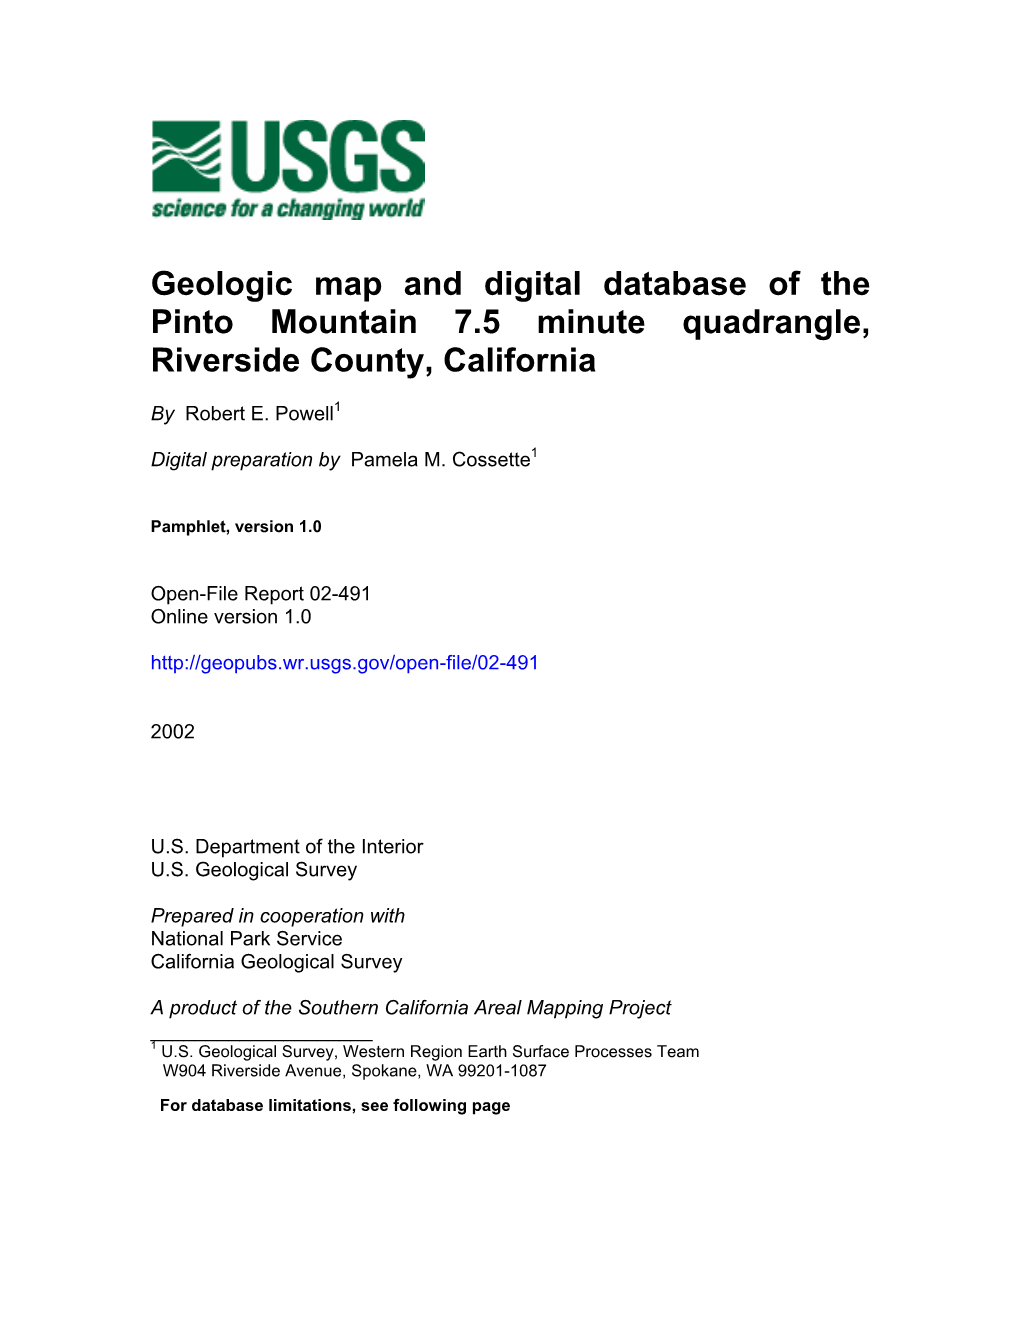 Geologic Map and Digital Database of the Pinto Mountain 7.5 Minute Quadrangle, Riverside County, California